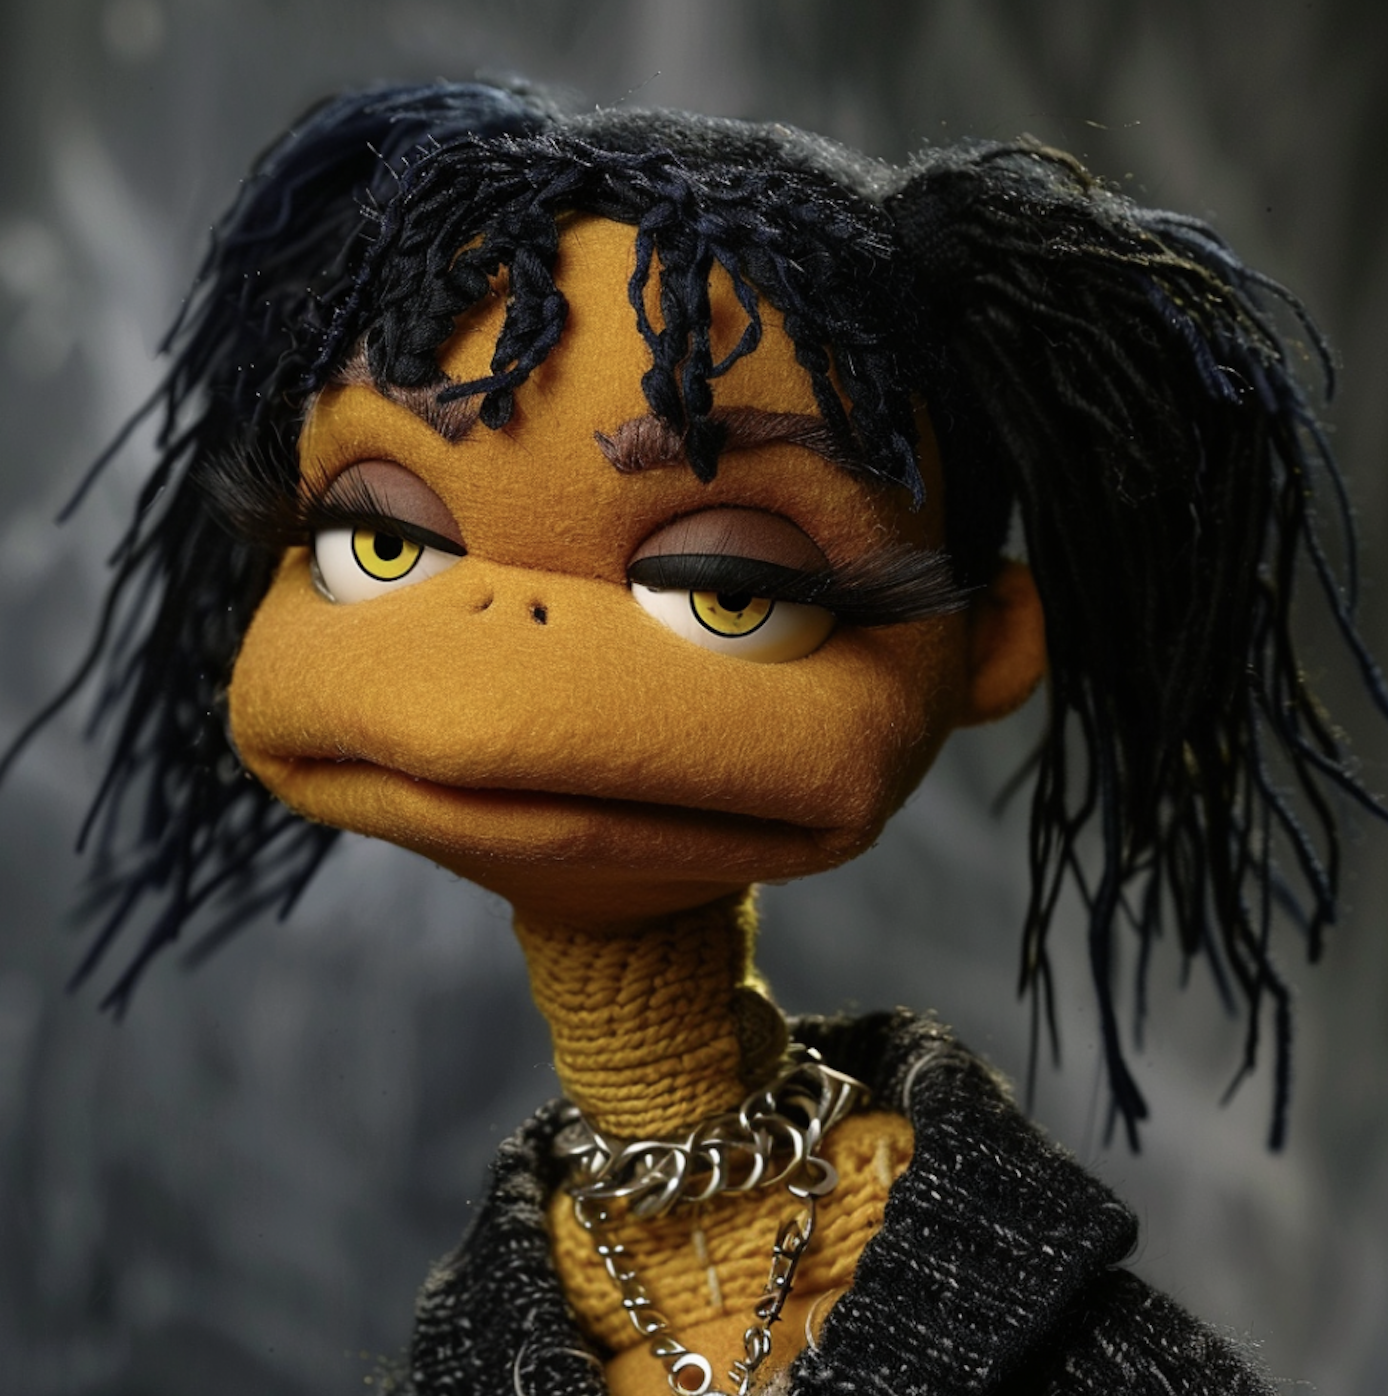 Puppet with textured black hair, heavy-lidded eyes, chain necklace, and textured jacket